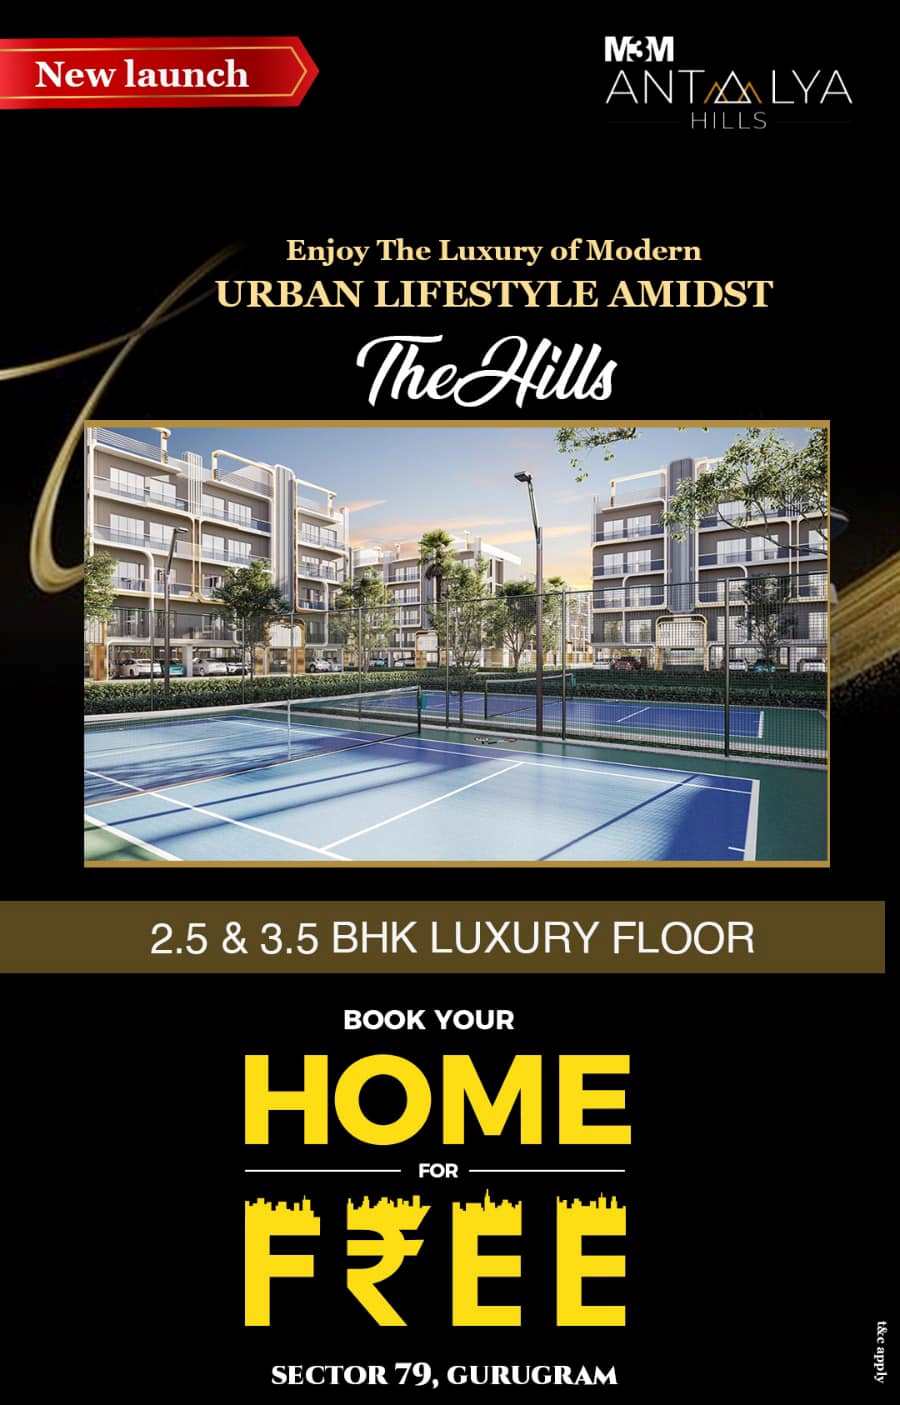 Enjoy the luxury of modern urban lifestyle amidst the hill at M3M Antalya Hills in Sector 79, Gurgaon Update